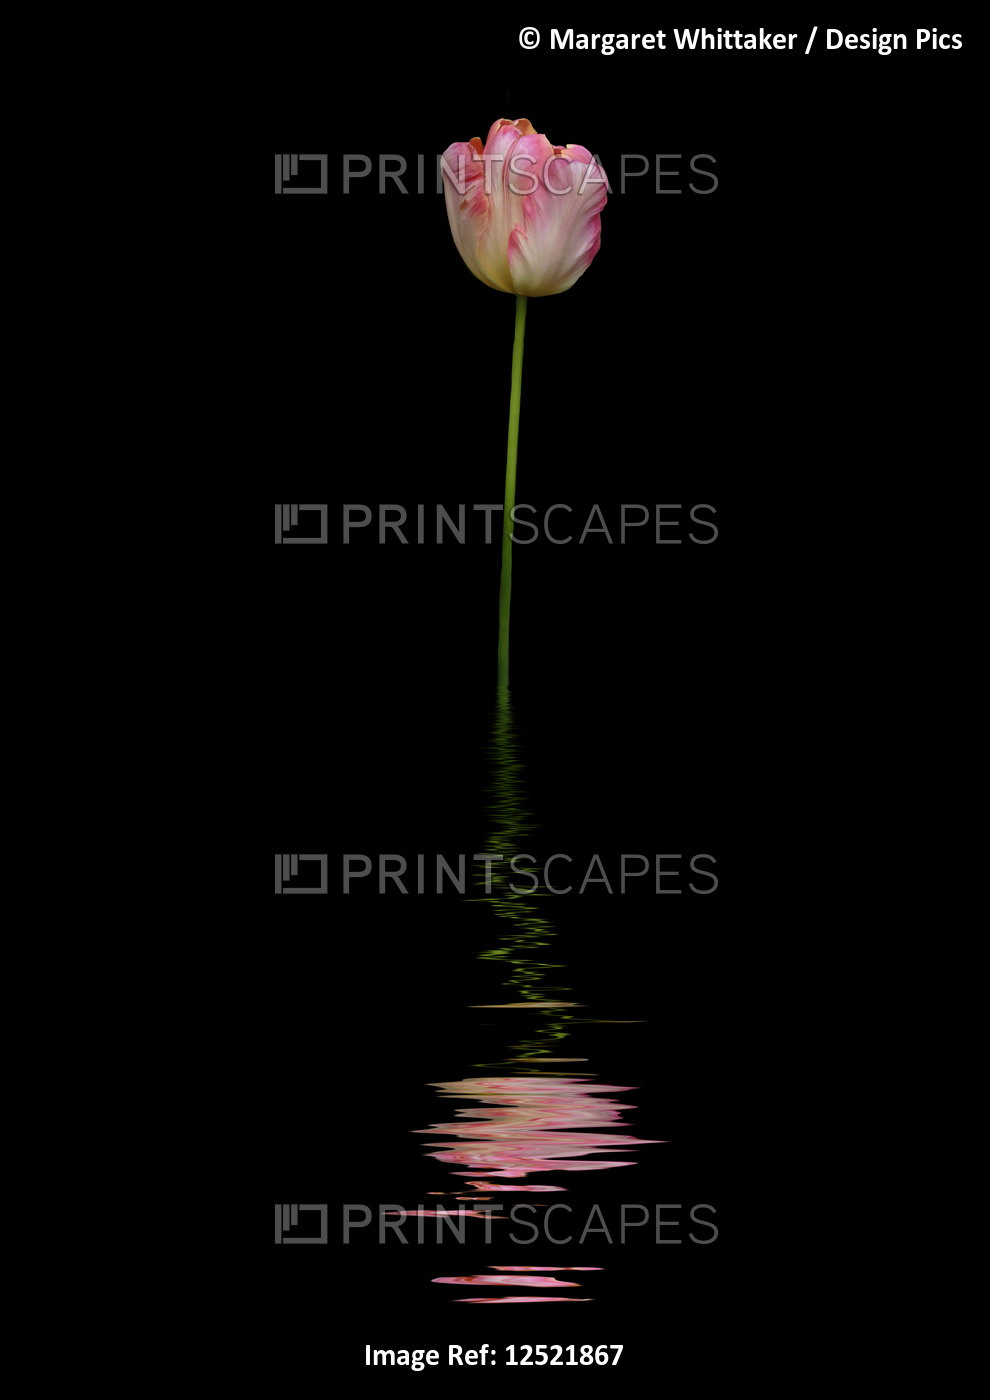 Art image of a pink and white tulip reflected in water